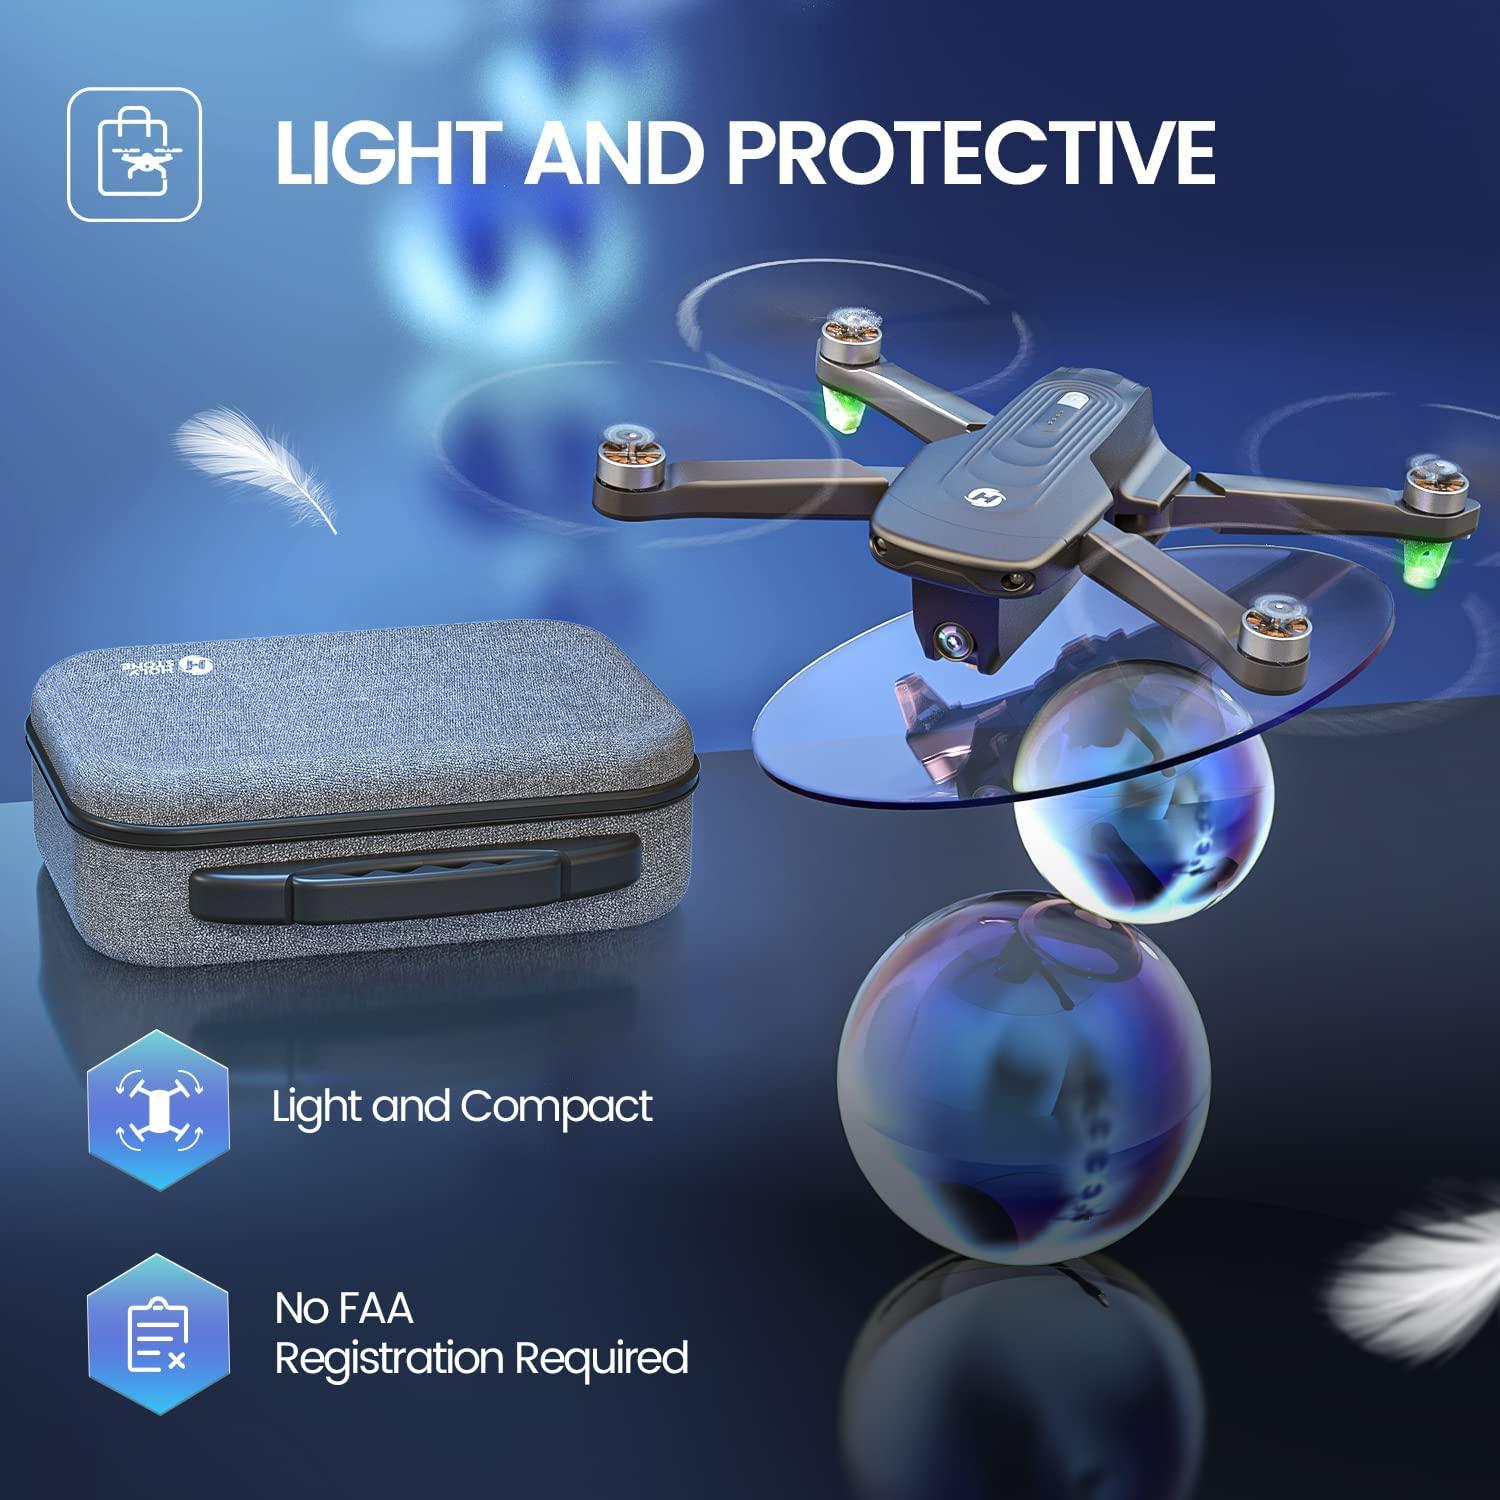 Holy Stone HS175D GPS Drone - with 4K HD Camera for Adults RC Quadcopter with Auto Return, Follow Me, Brushless Motor, Circle Fly, Waypoint Fly, Altitude Hold, Headless Mode, 46 Mins Long Flight Professional Camera Drone - RCDrone